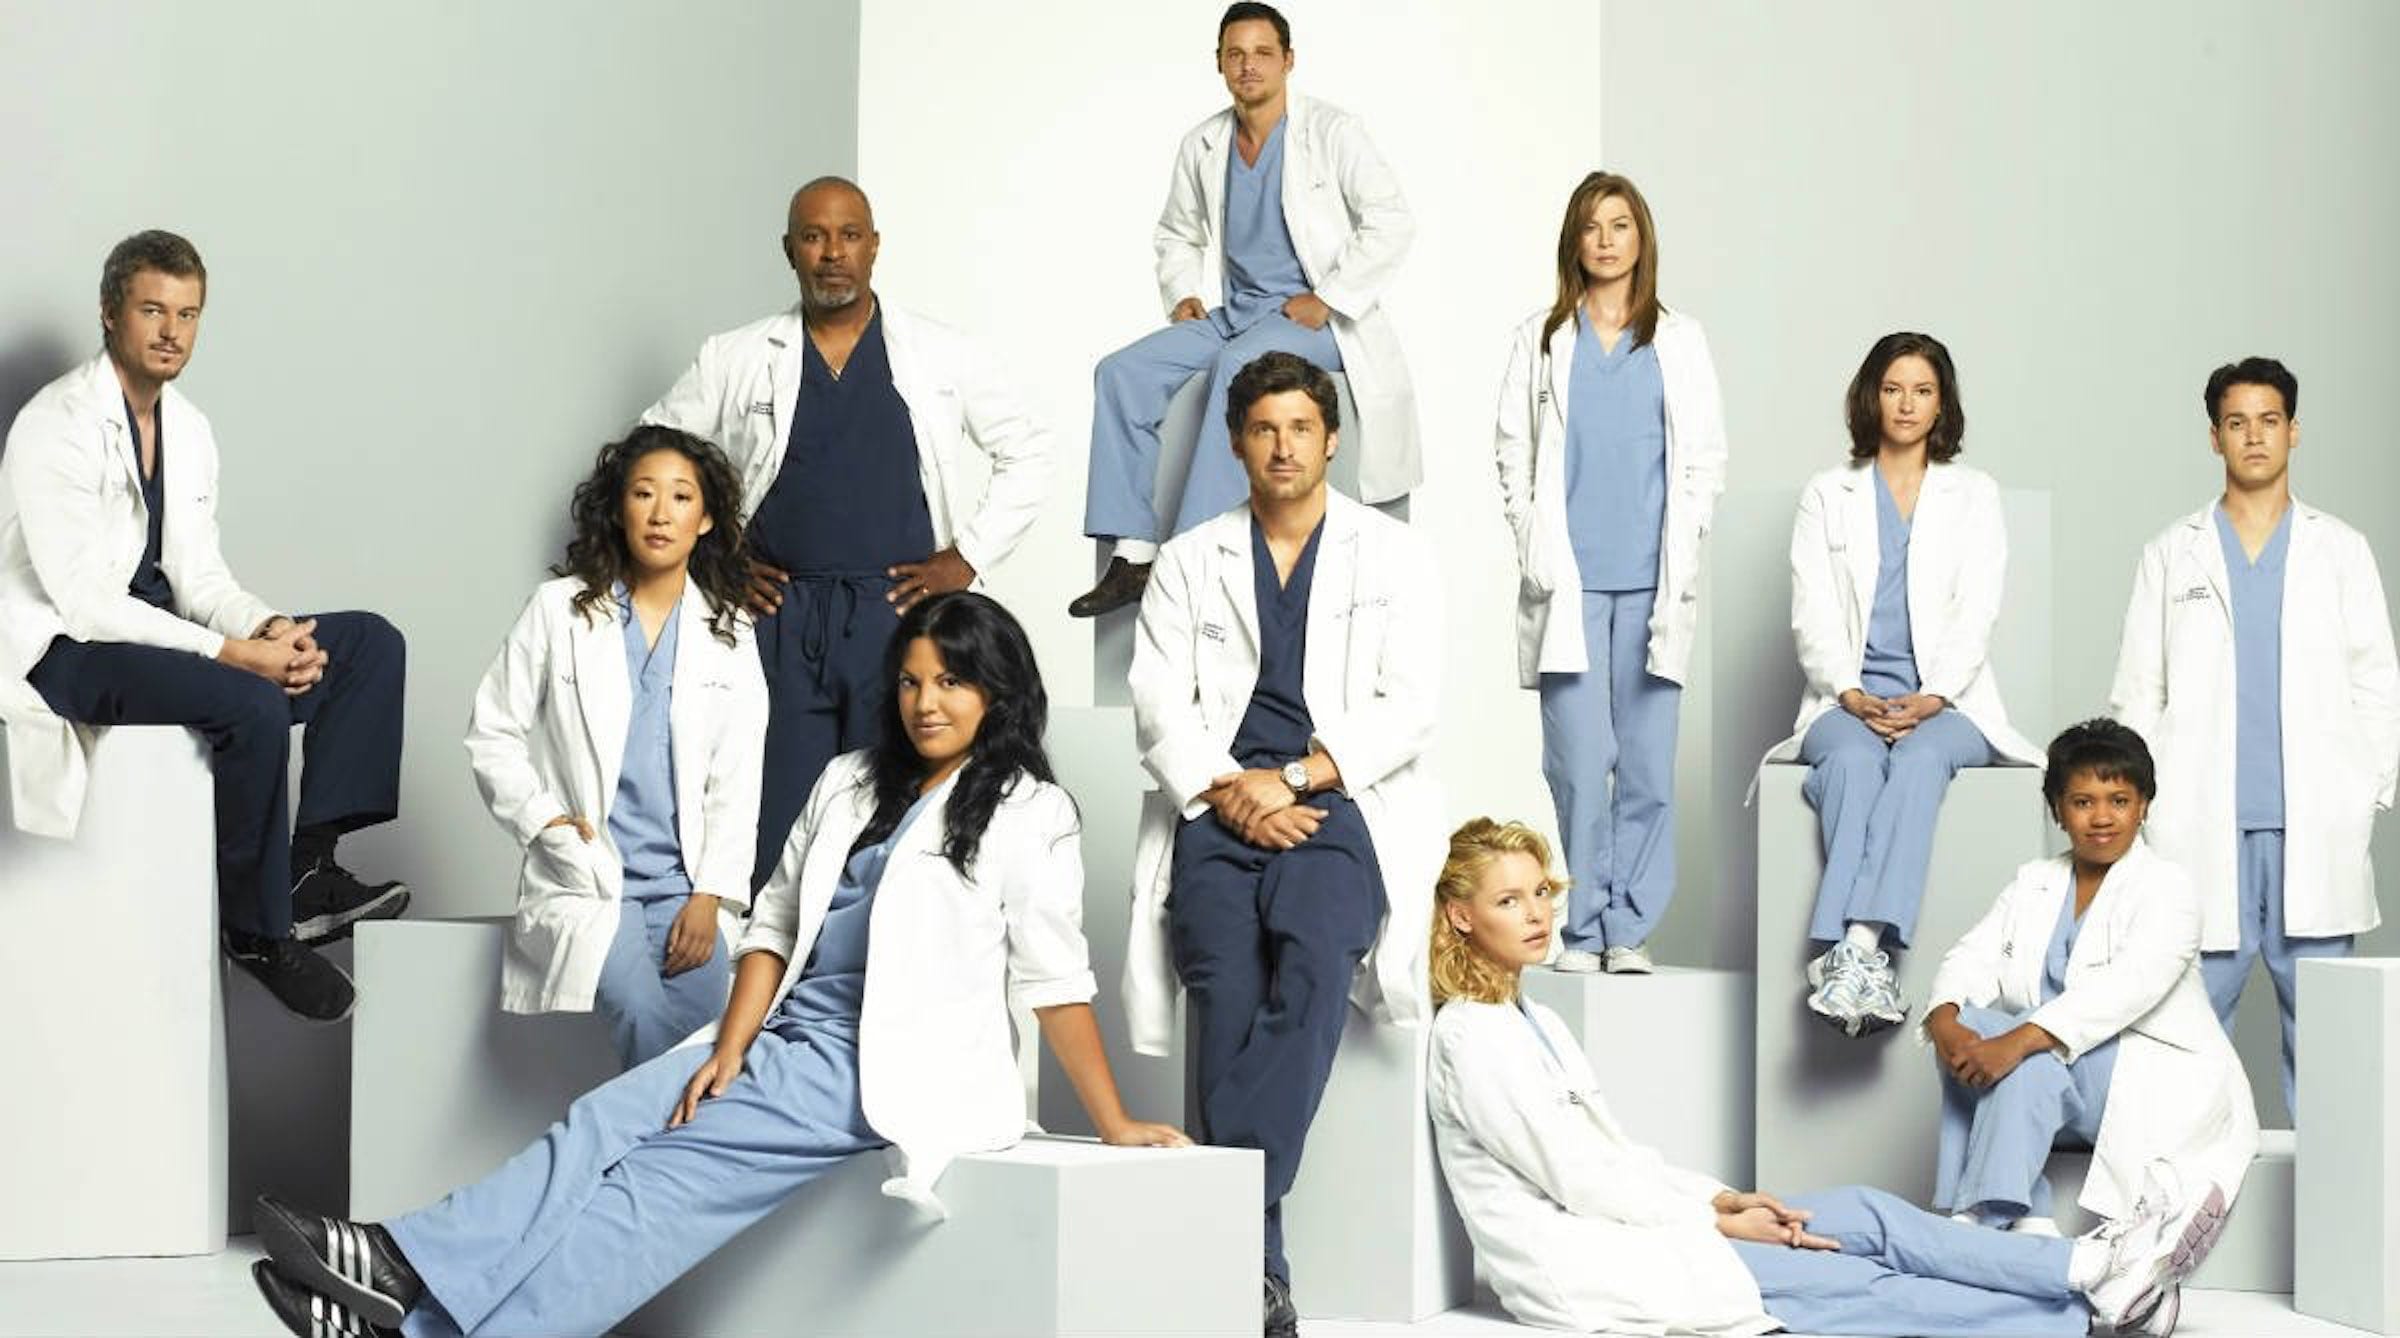 'Grey's Anatomy' is loved by many. Here's a breakdown of the show's most essential episodes for newcomers.